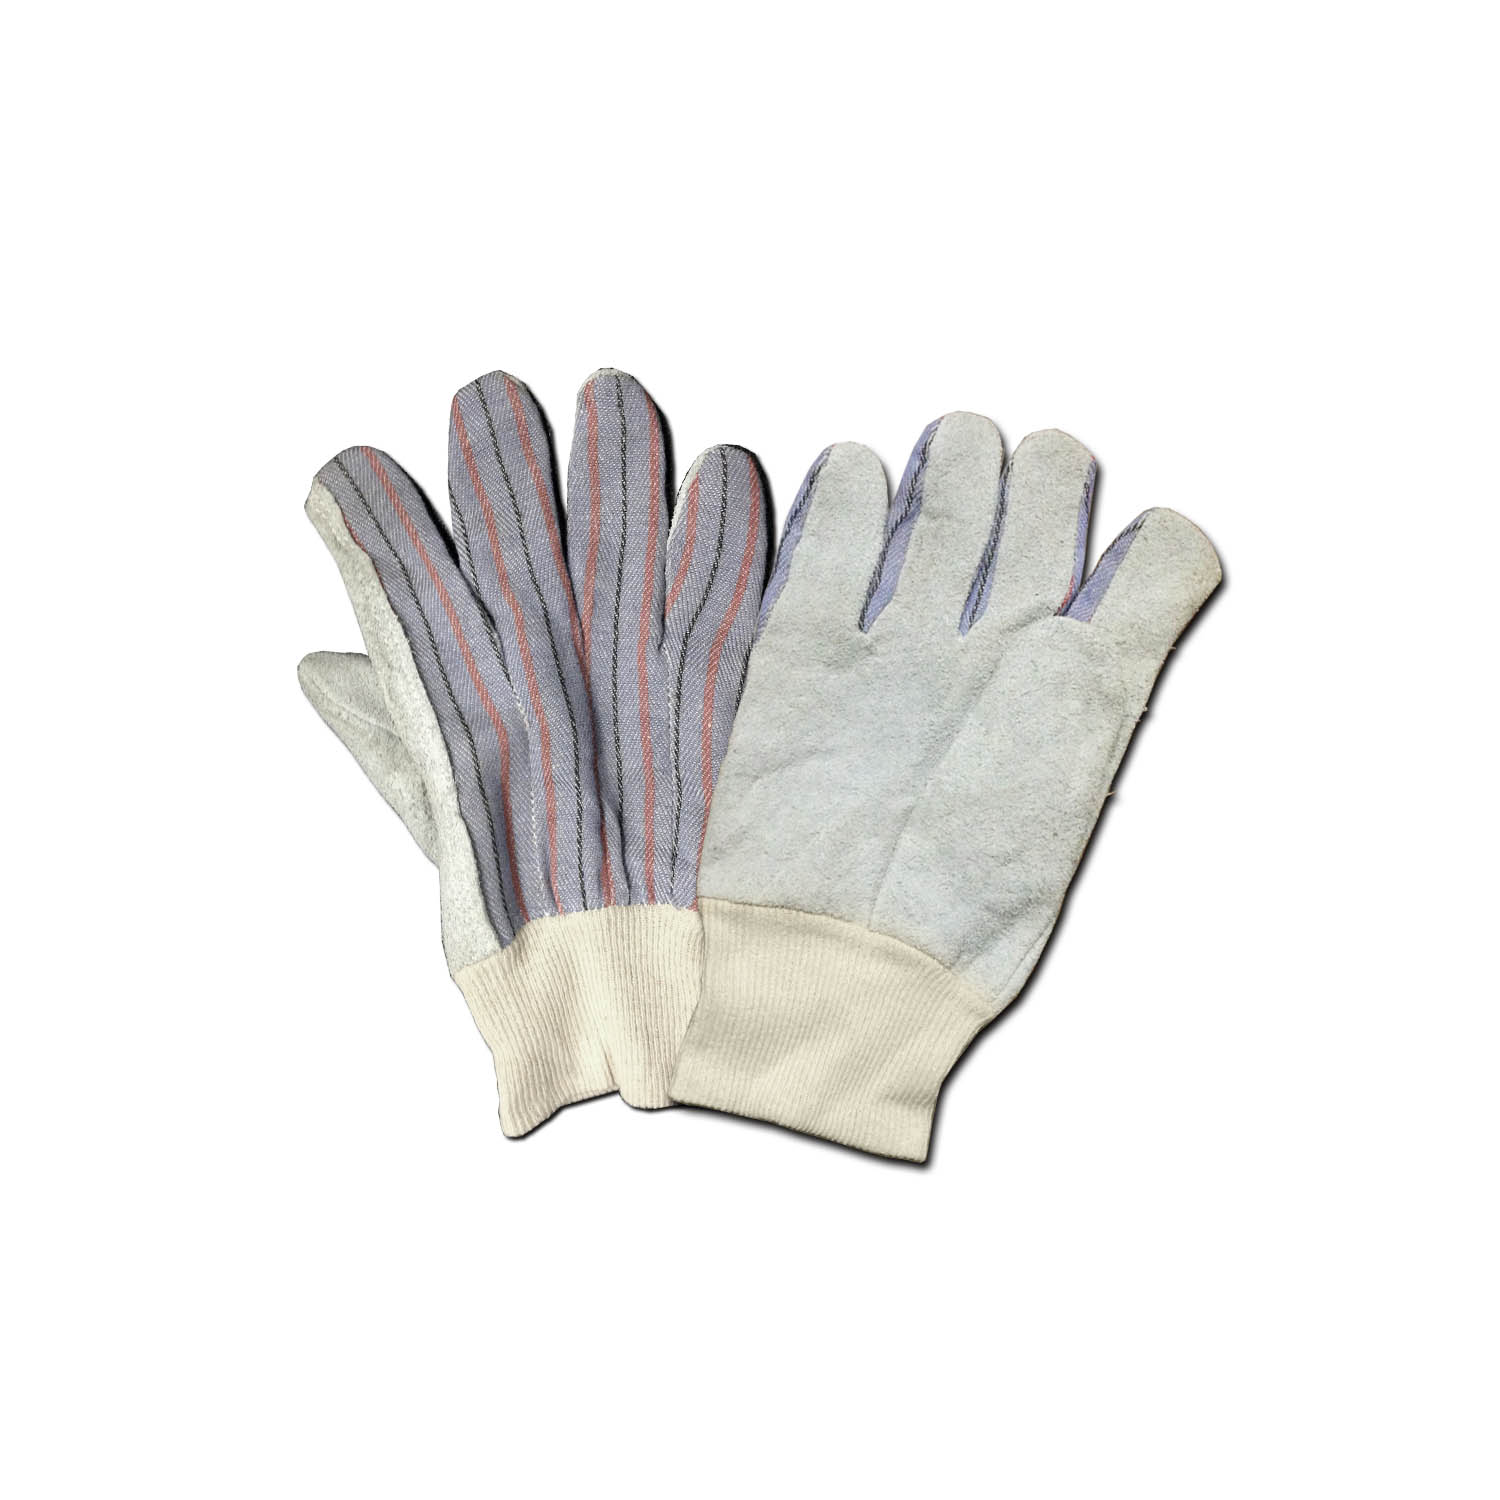 #49-2002 Palm Industrial Labour Working Safety Gloves